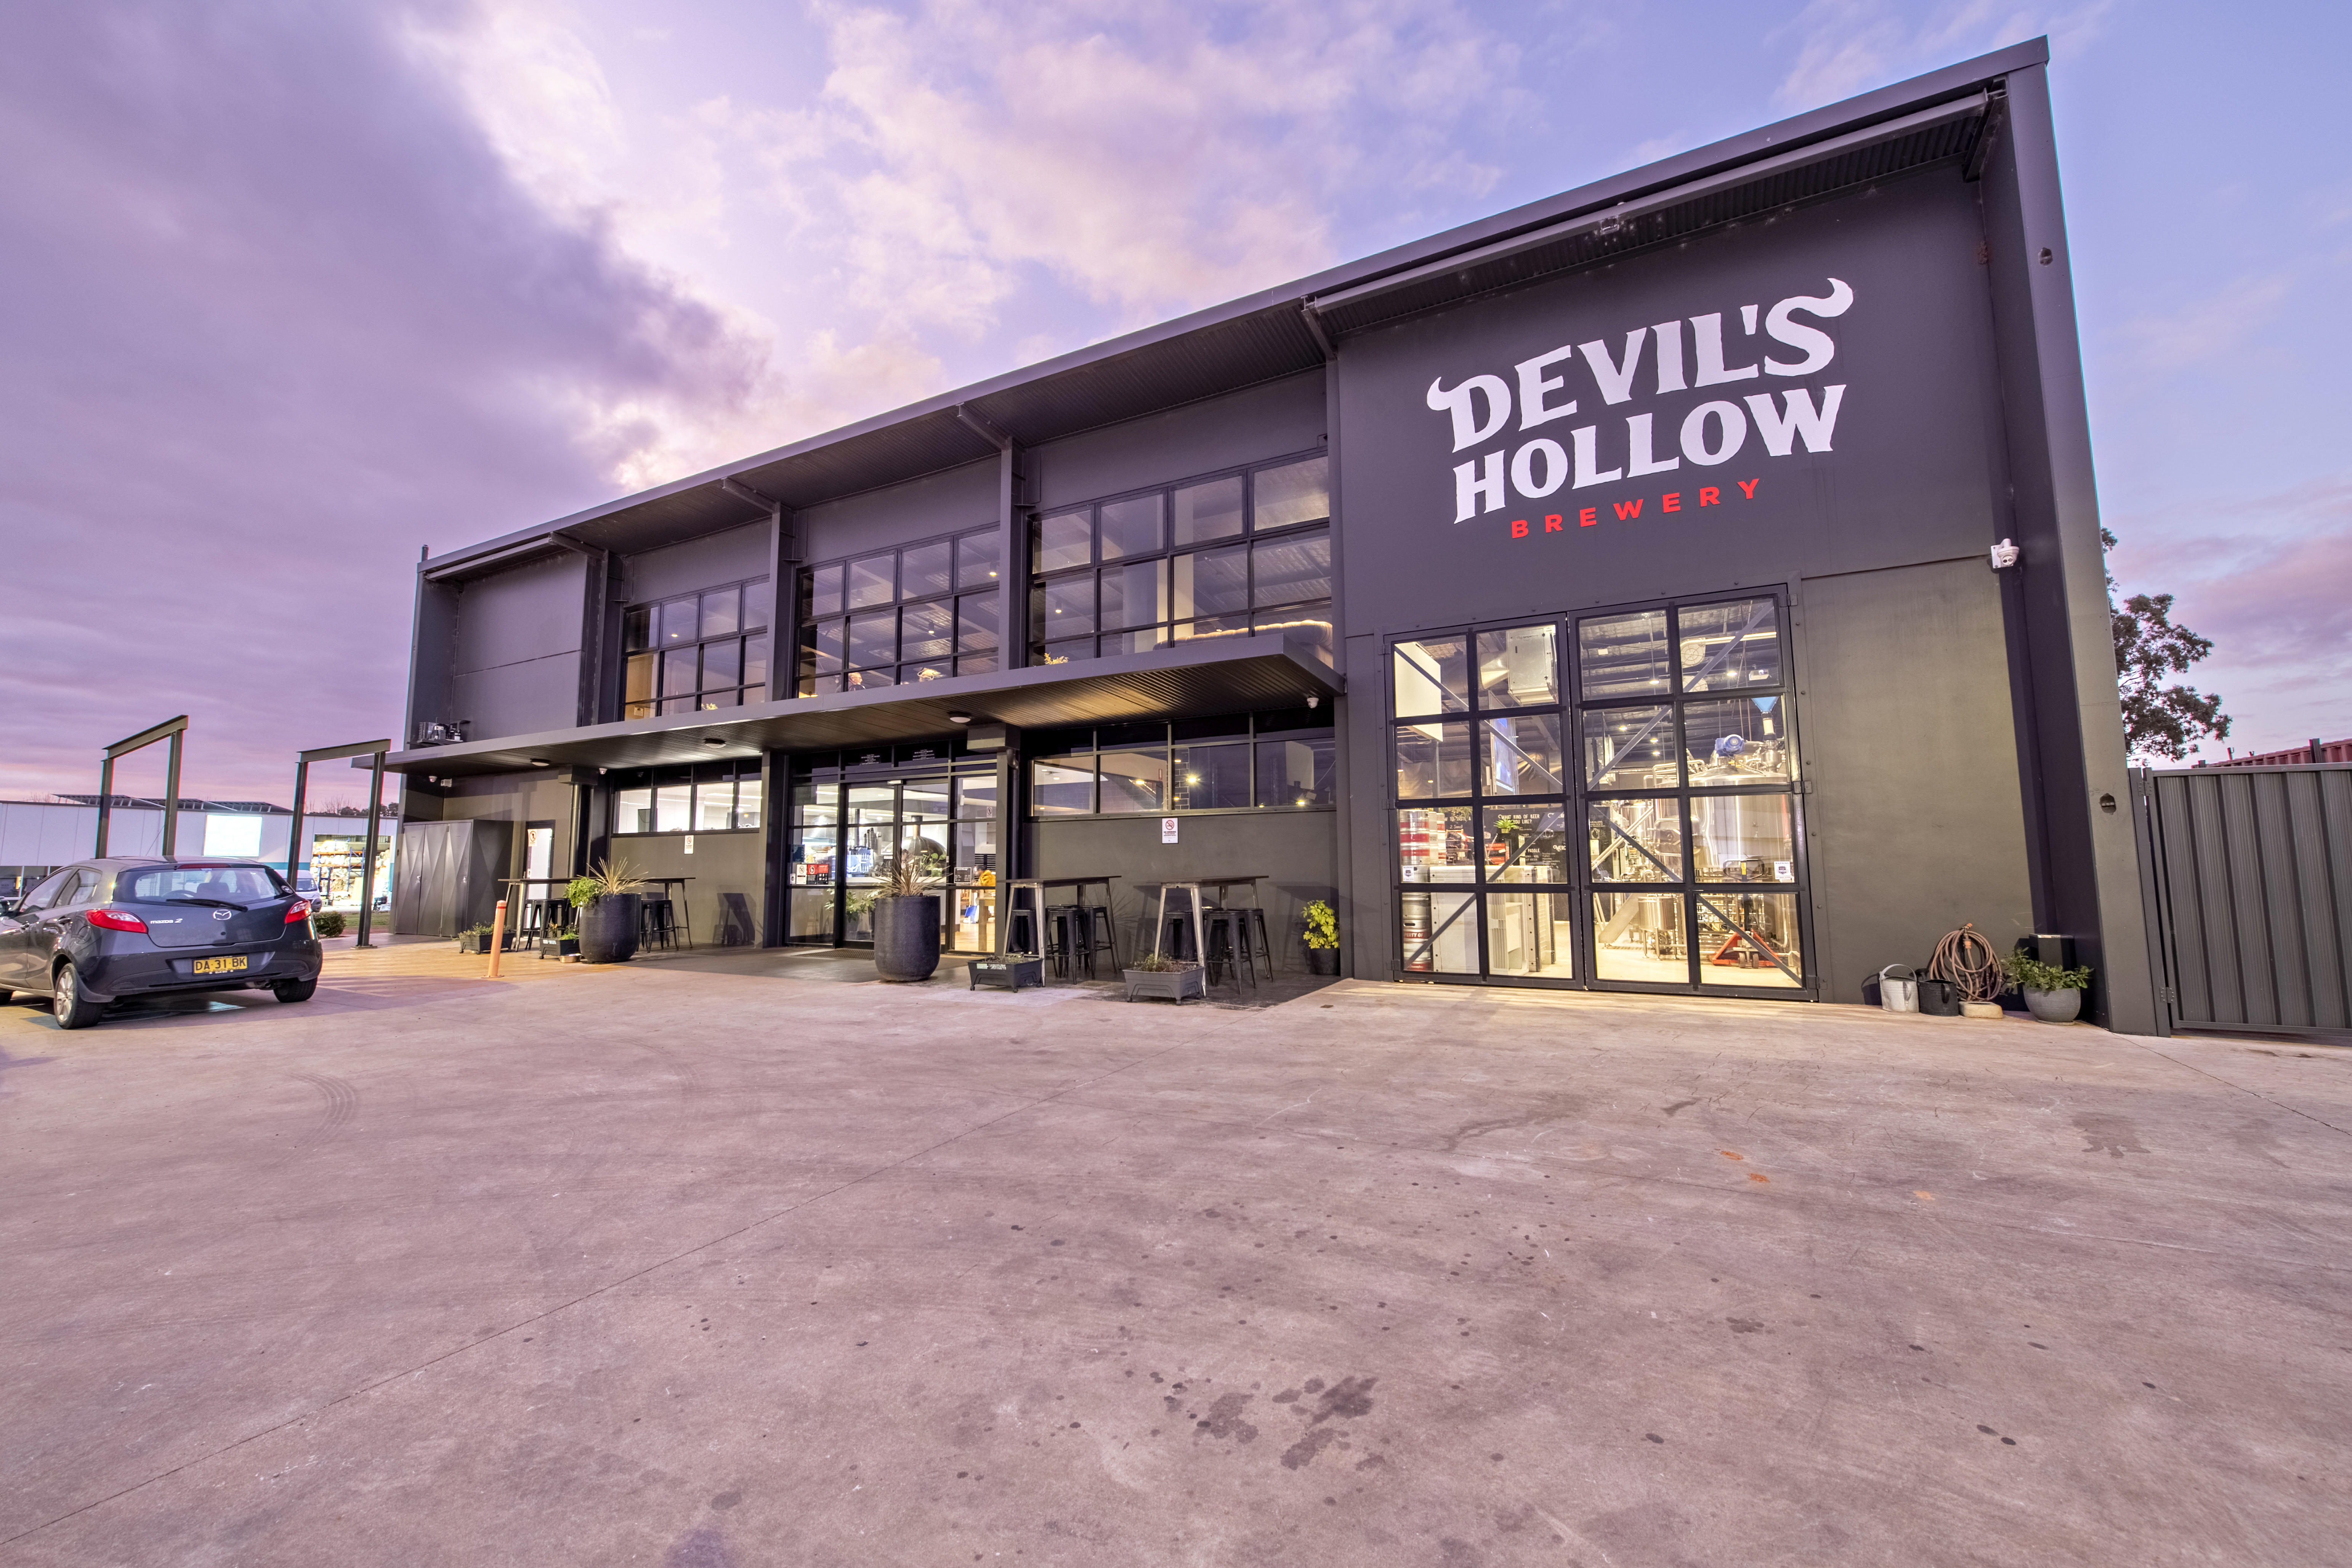 Devil's Hollow Brewery building